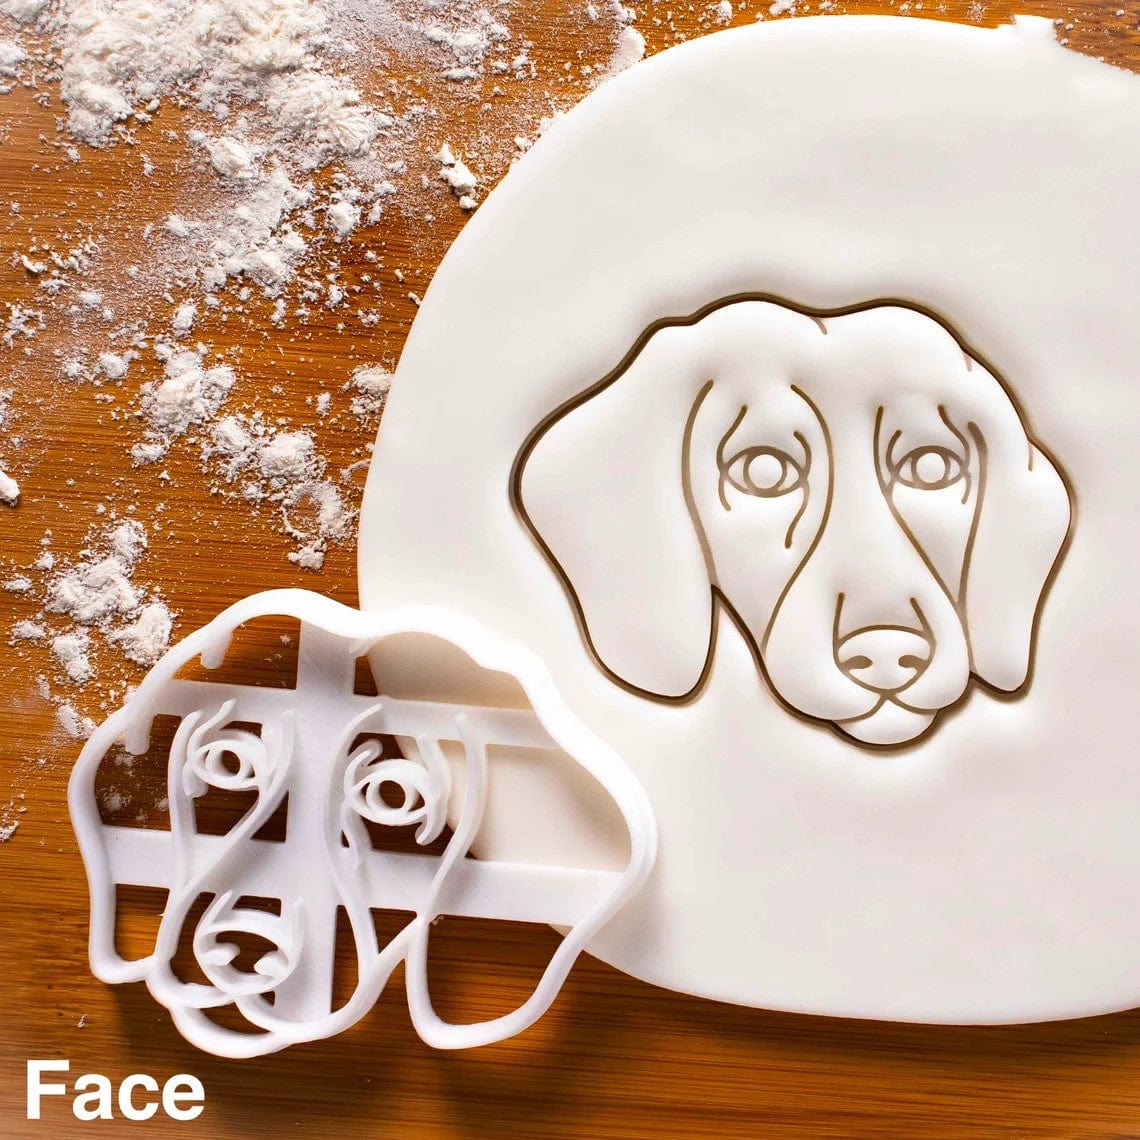 Dachshund Cookie Cutters Face The Doxie World